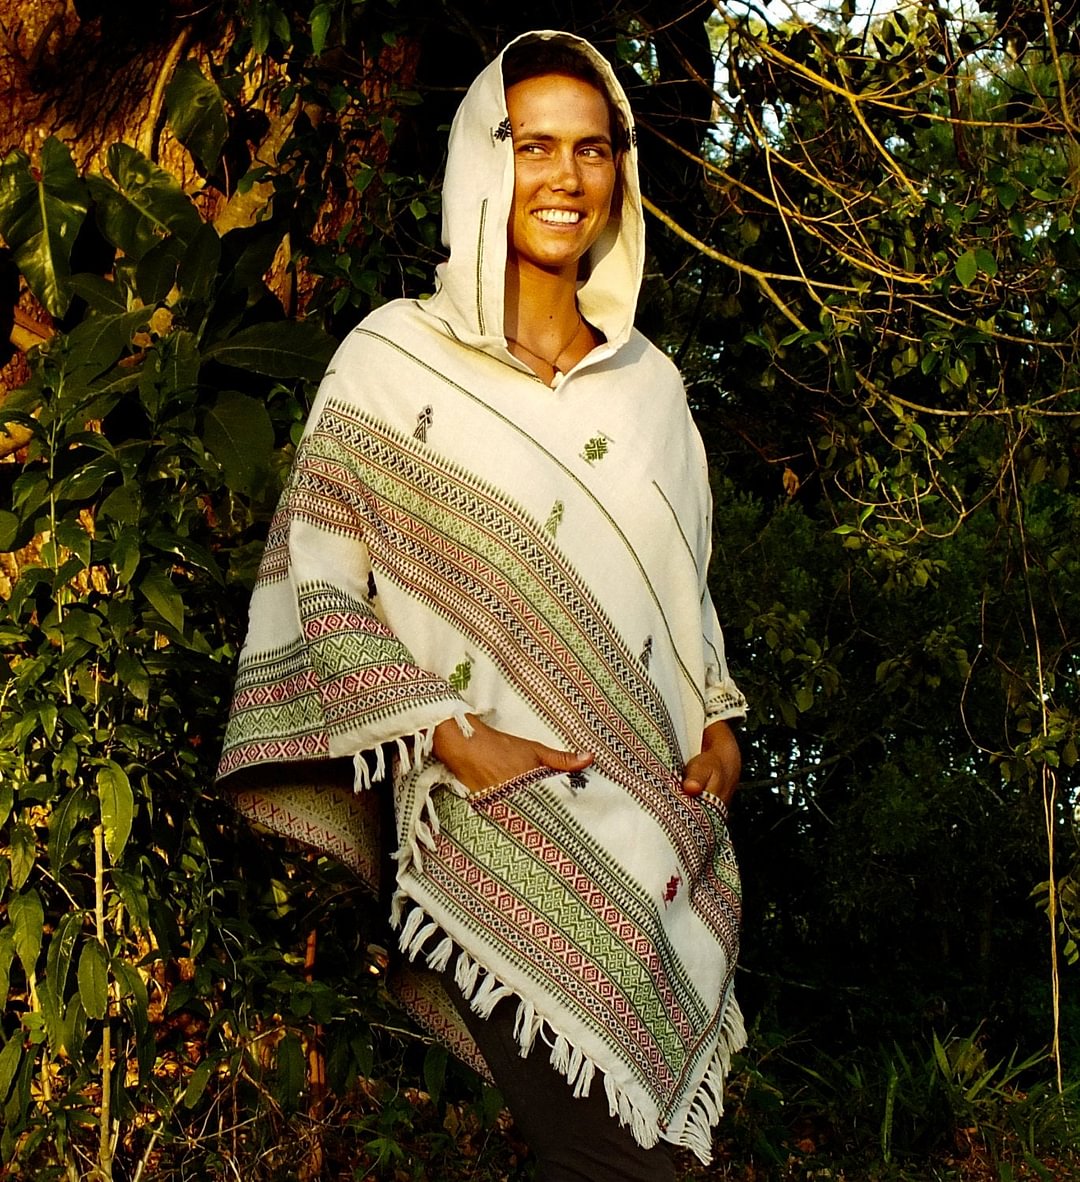 Handmade White Poncho with Hood Cashmere Wool, Earthy Tribal Pattern Festival Gypsy   Boho Bohemian Primitive Nomadic Mexican pockets